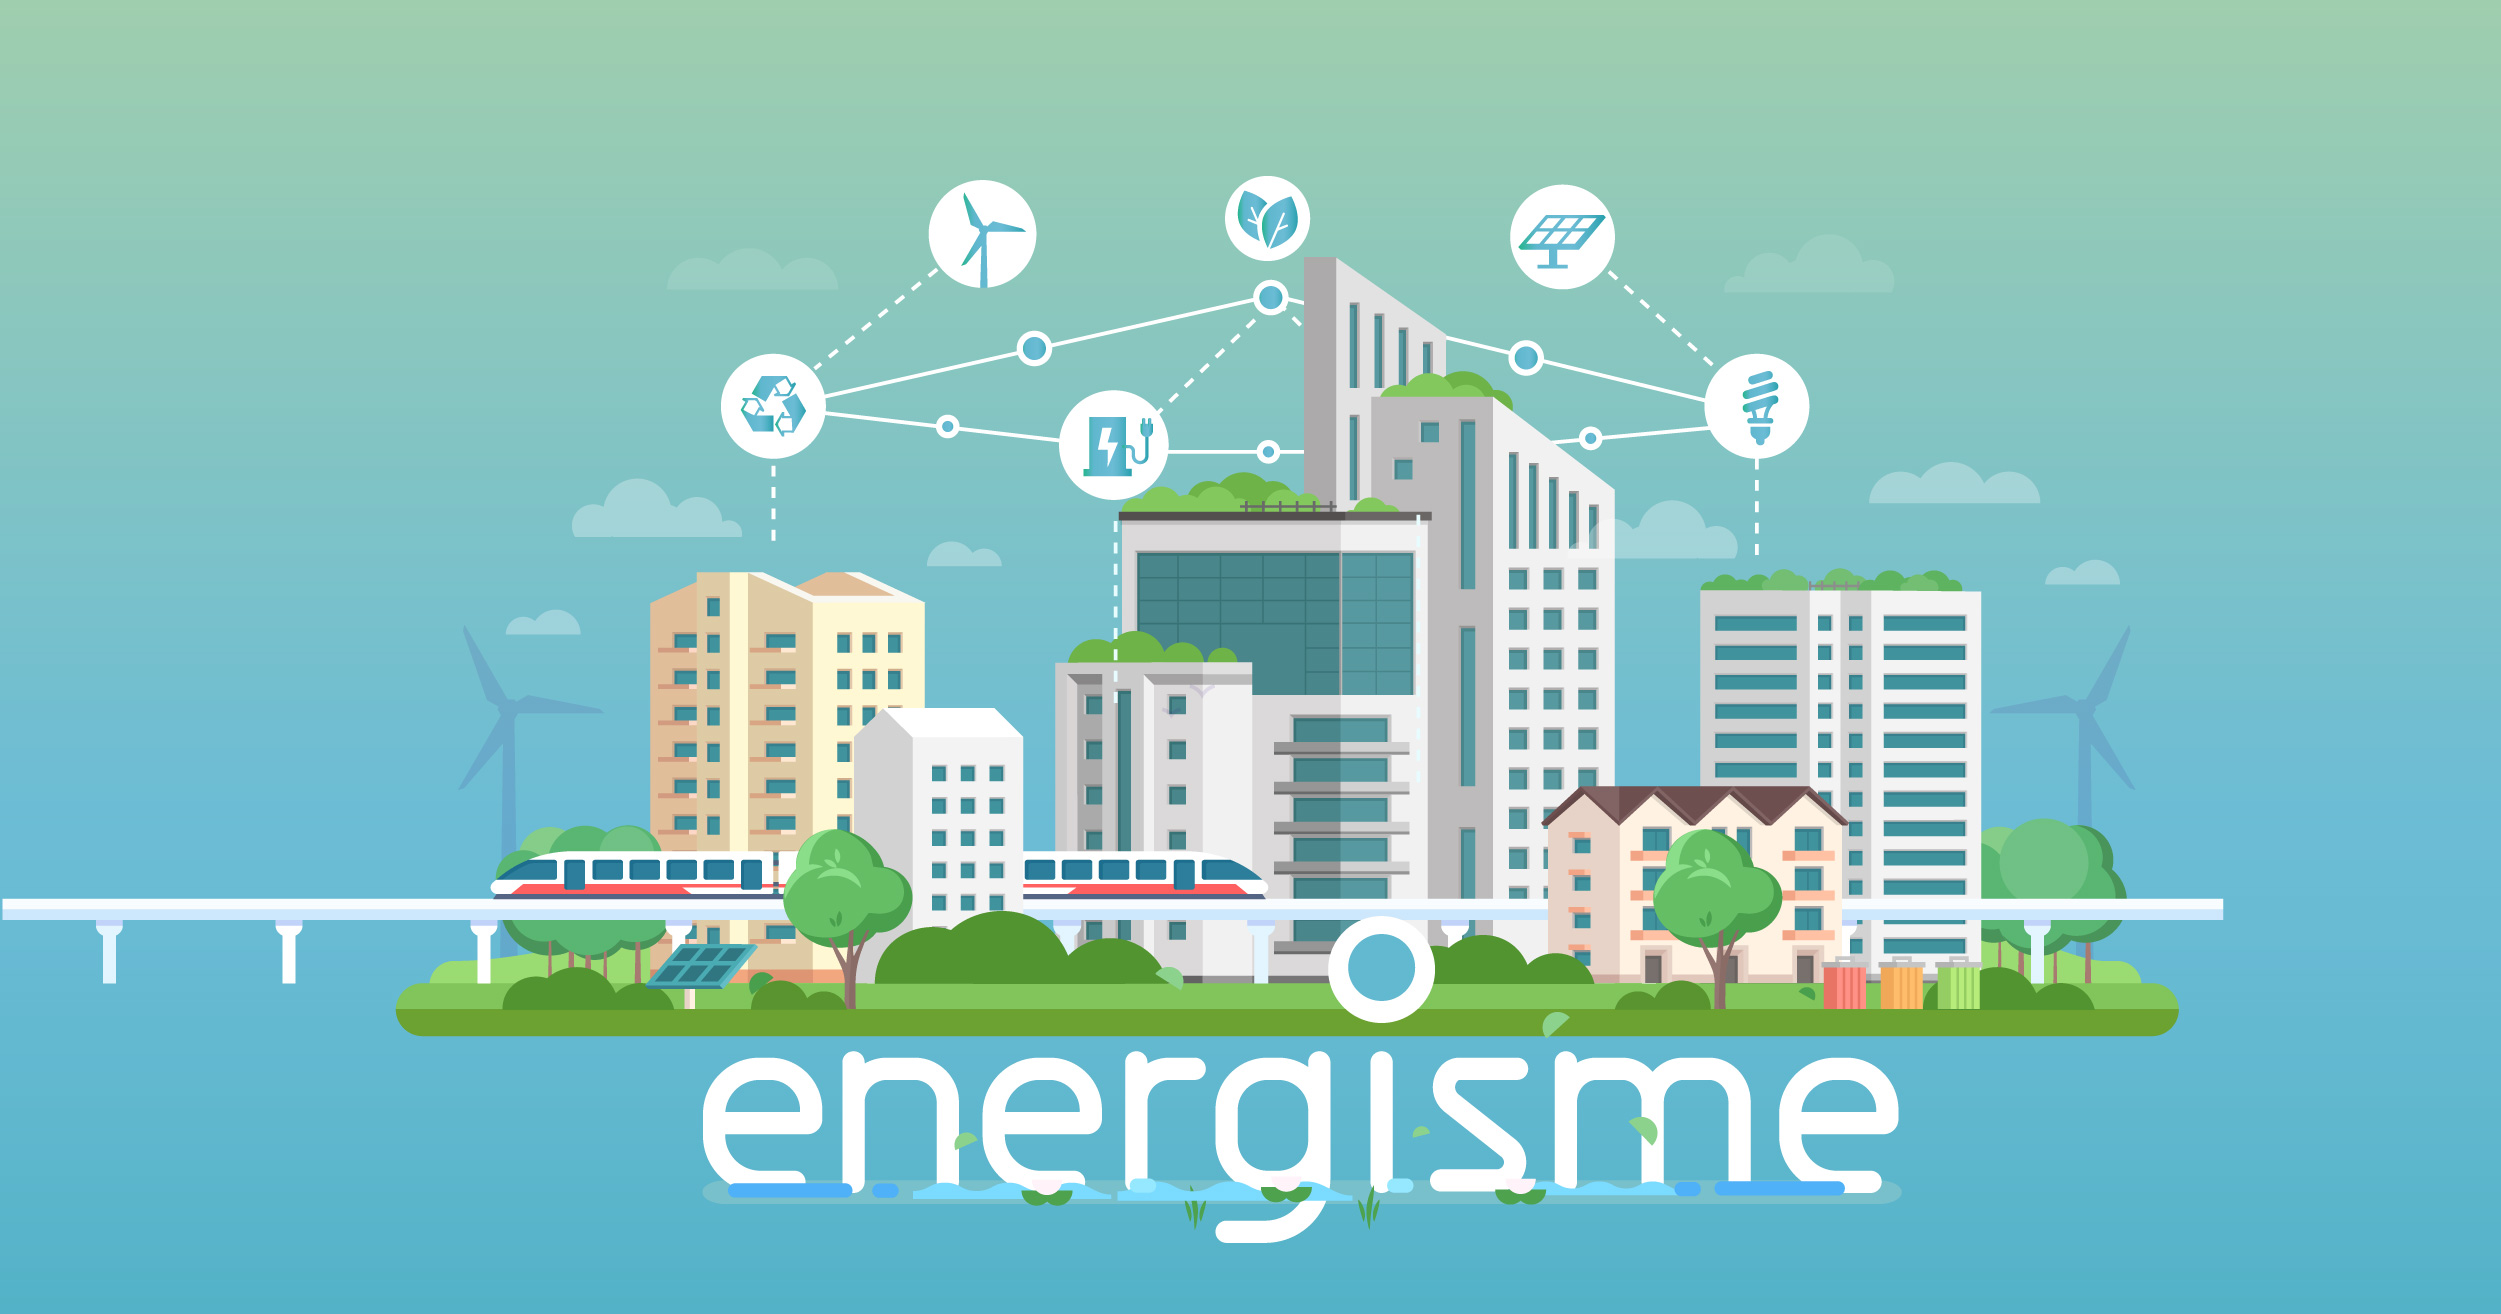 Energisme and Orange Business Services sign a partnership to optimize the energy performance of buildings by combining their respective energy data and IoT mastery